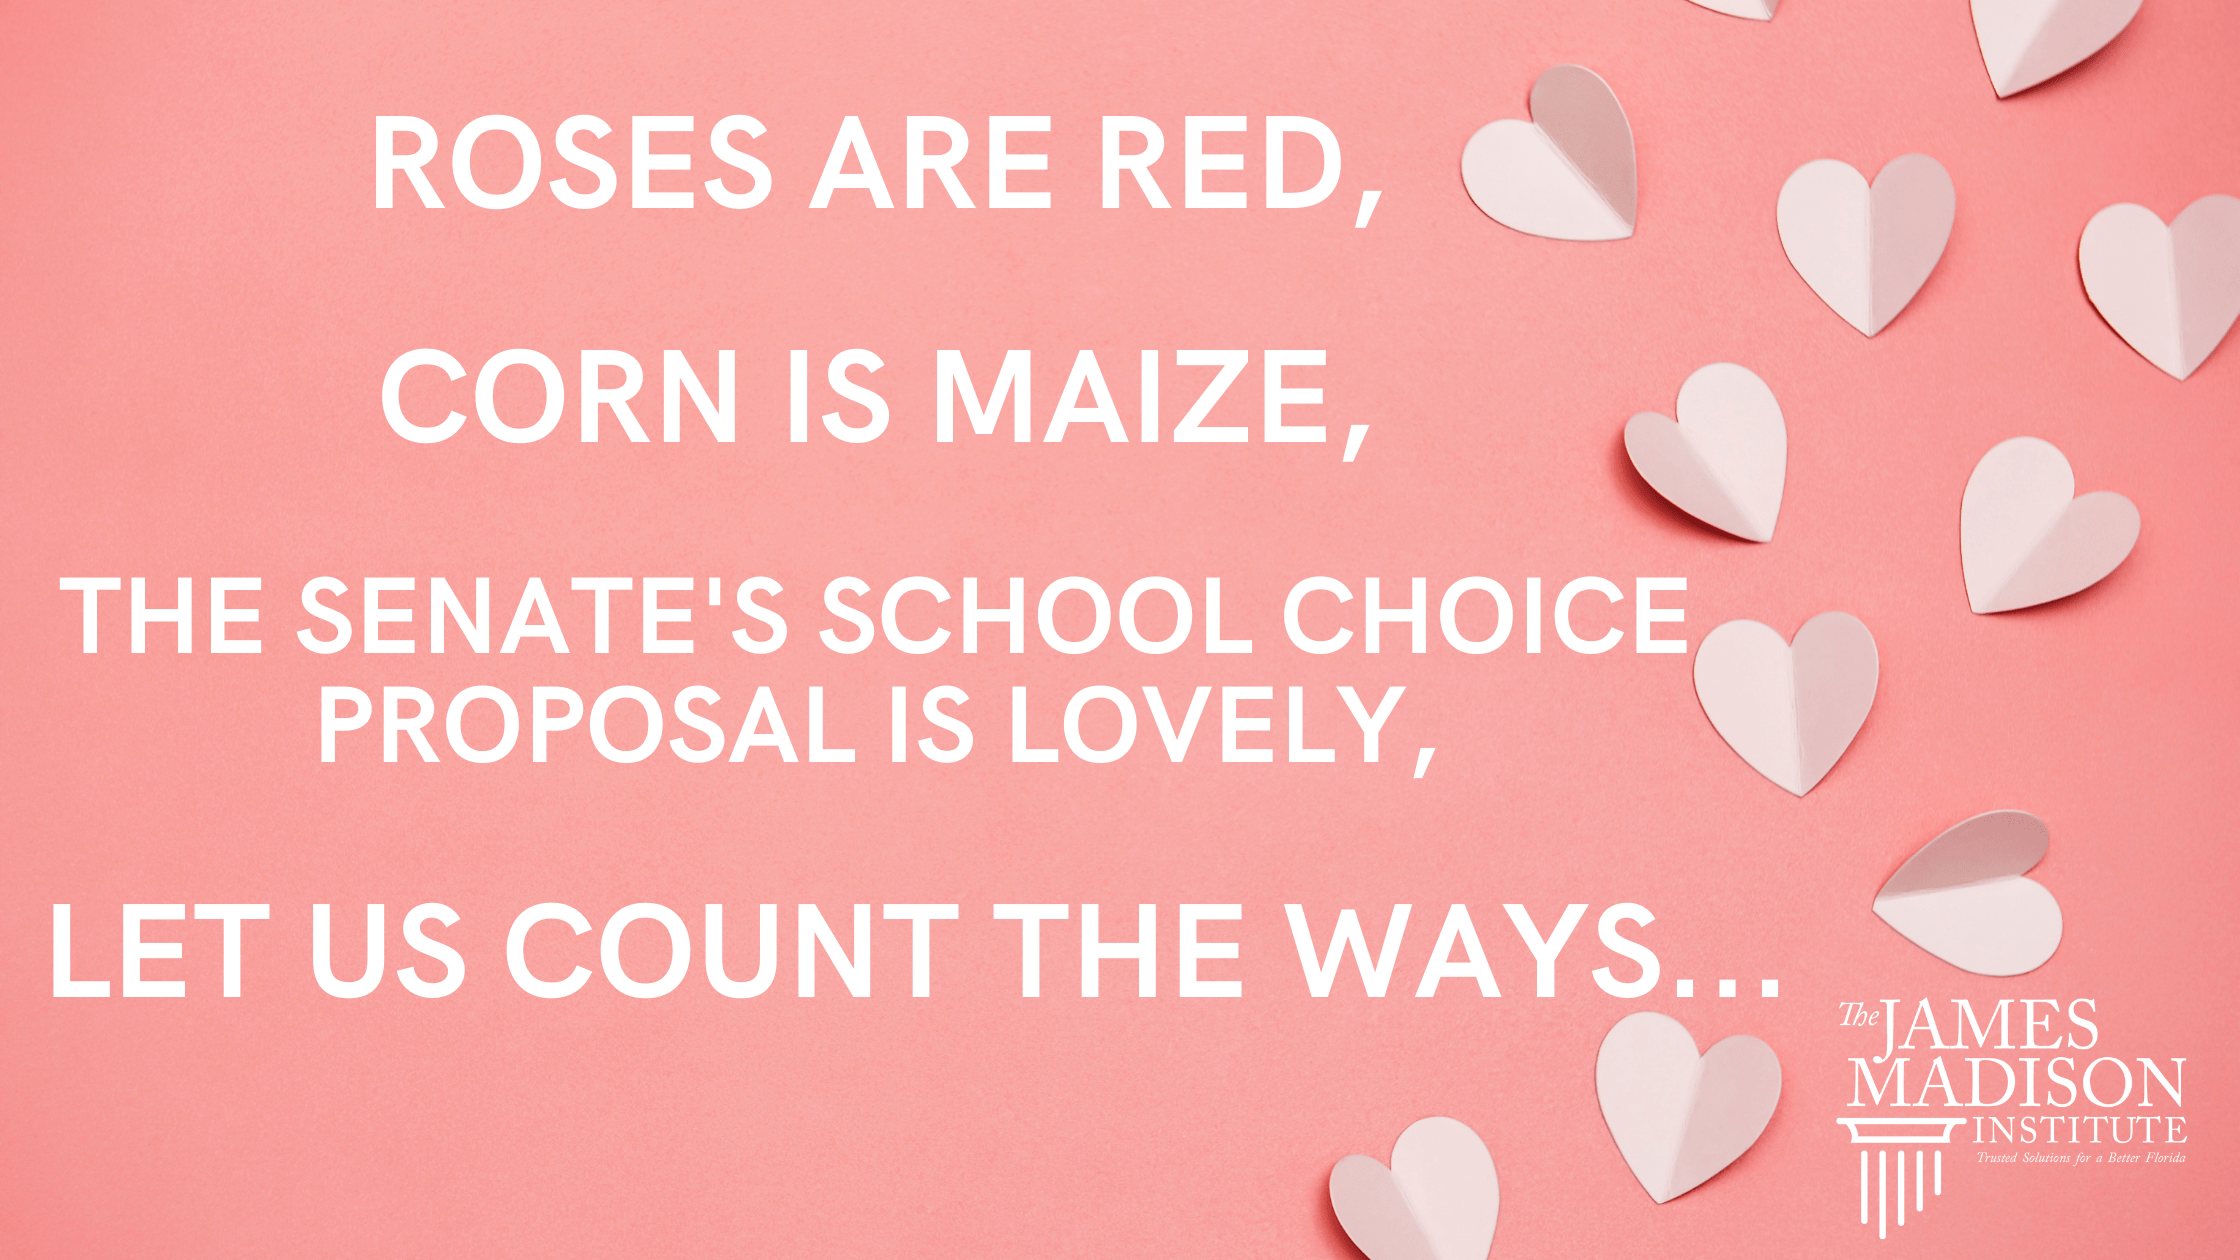 8 Things We Love About the Senate School Choice Proposal